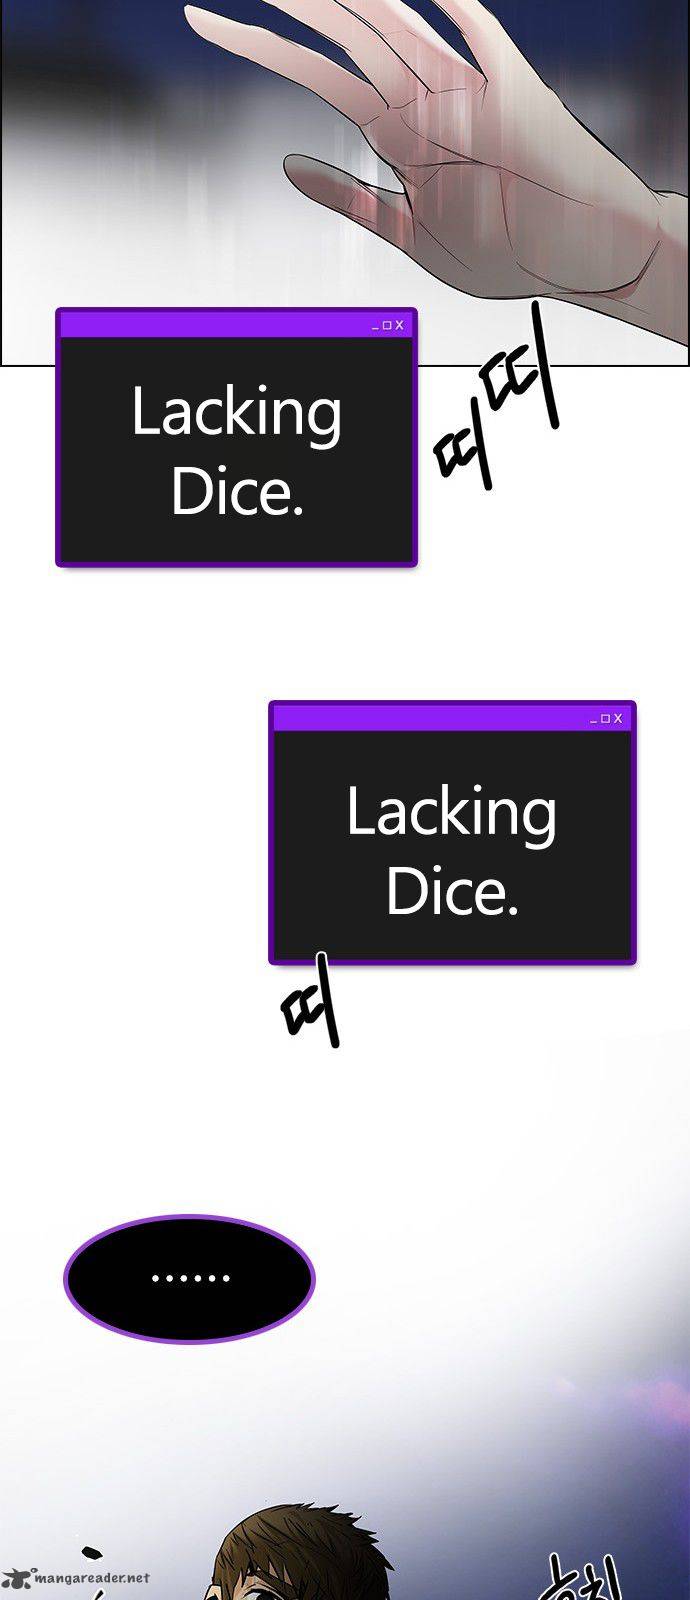 dice_the_cube_that_changes_everything_191_37